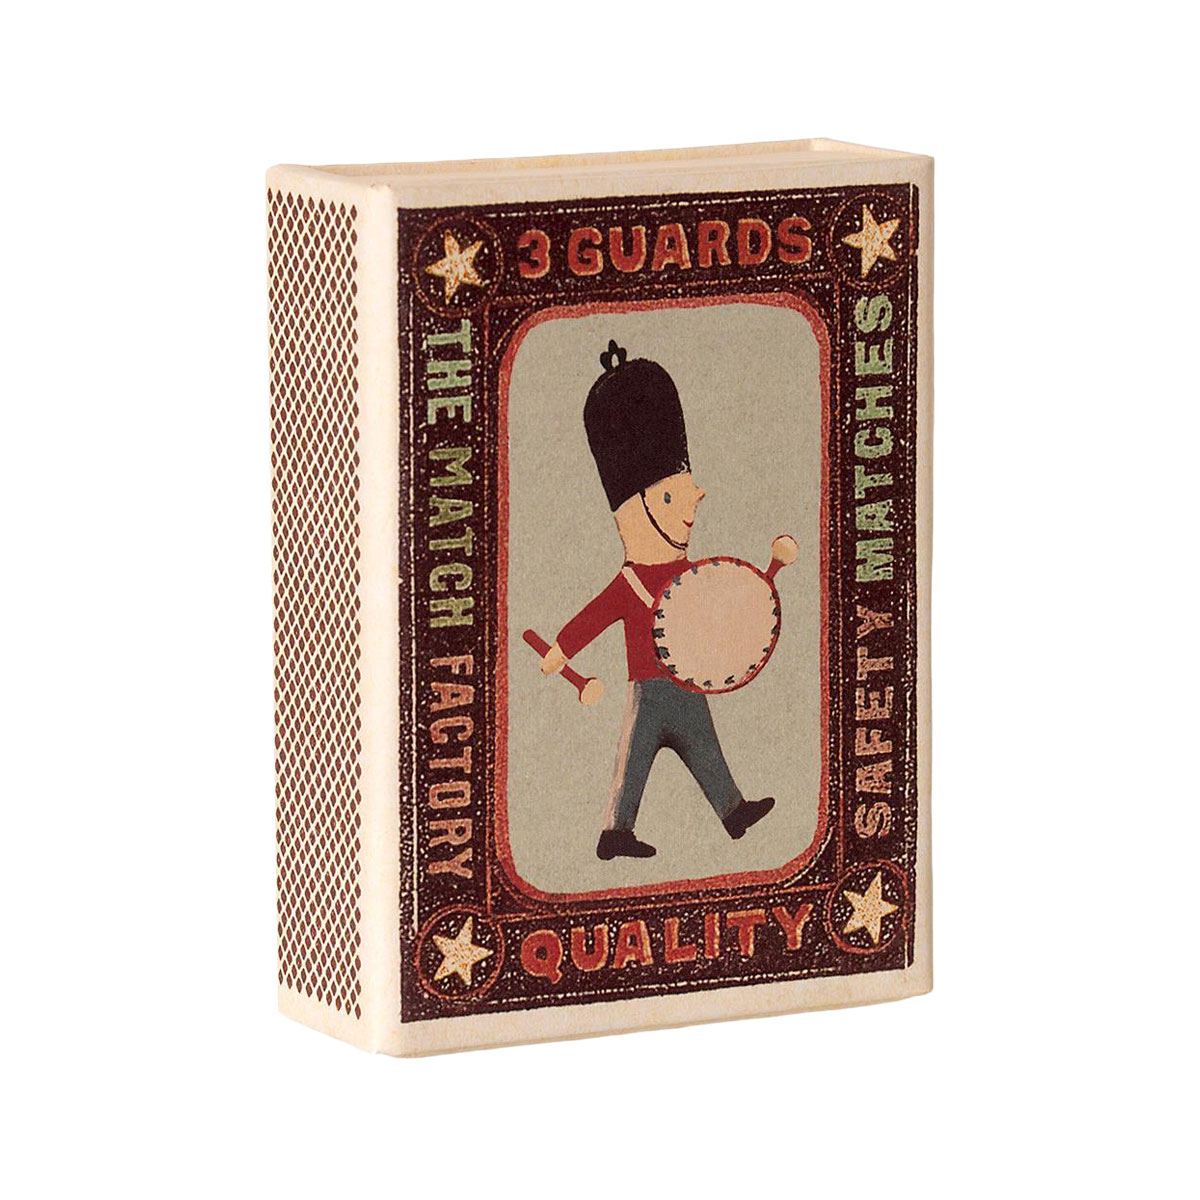 maileg christmas Ornaments 3 guards in matchbox